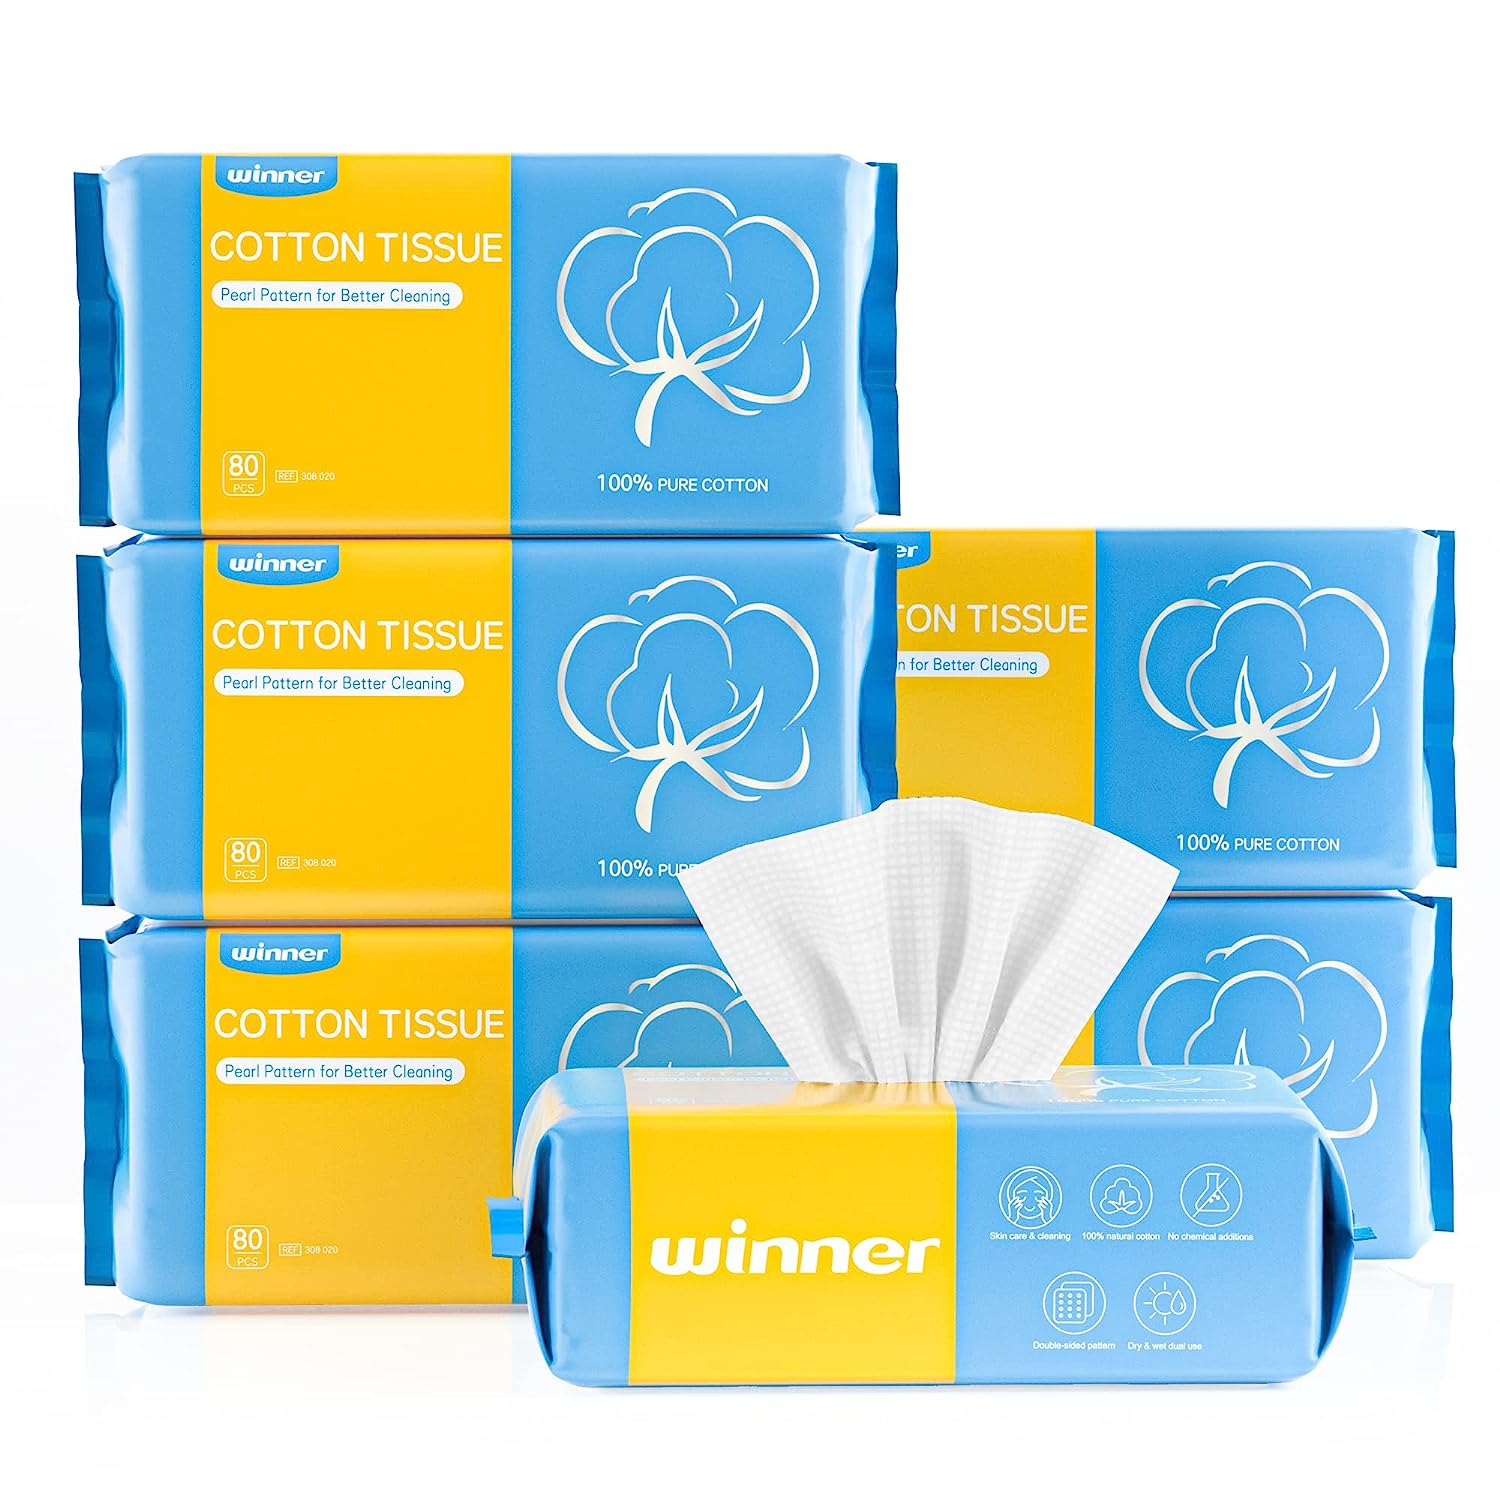 Winner Facial Tissue for Sensitive Skin, Makeup Wipes, Two-sided Texture, 480 Count